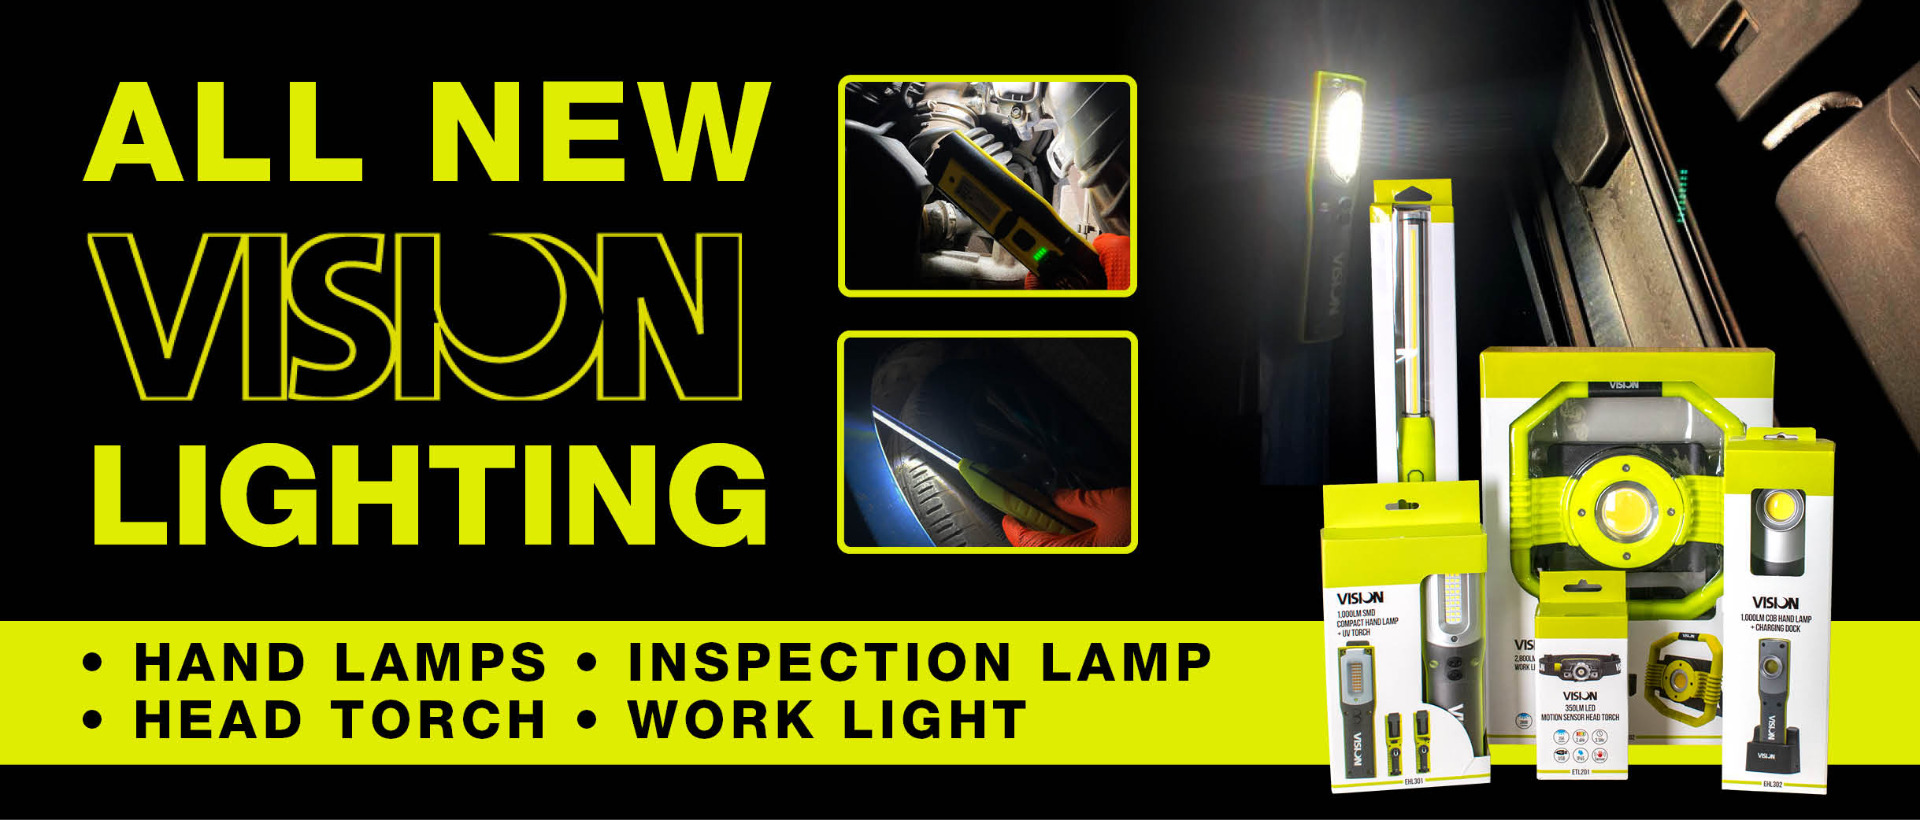 ALL NEW VISION LIGHTING - Hand Lamps - Insepction lamp - Head Torch - Work Light